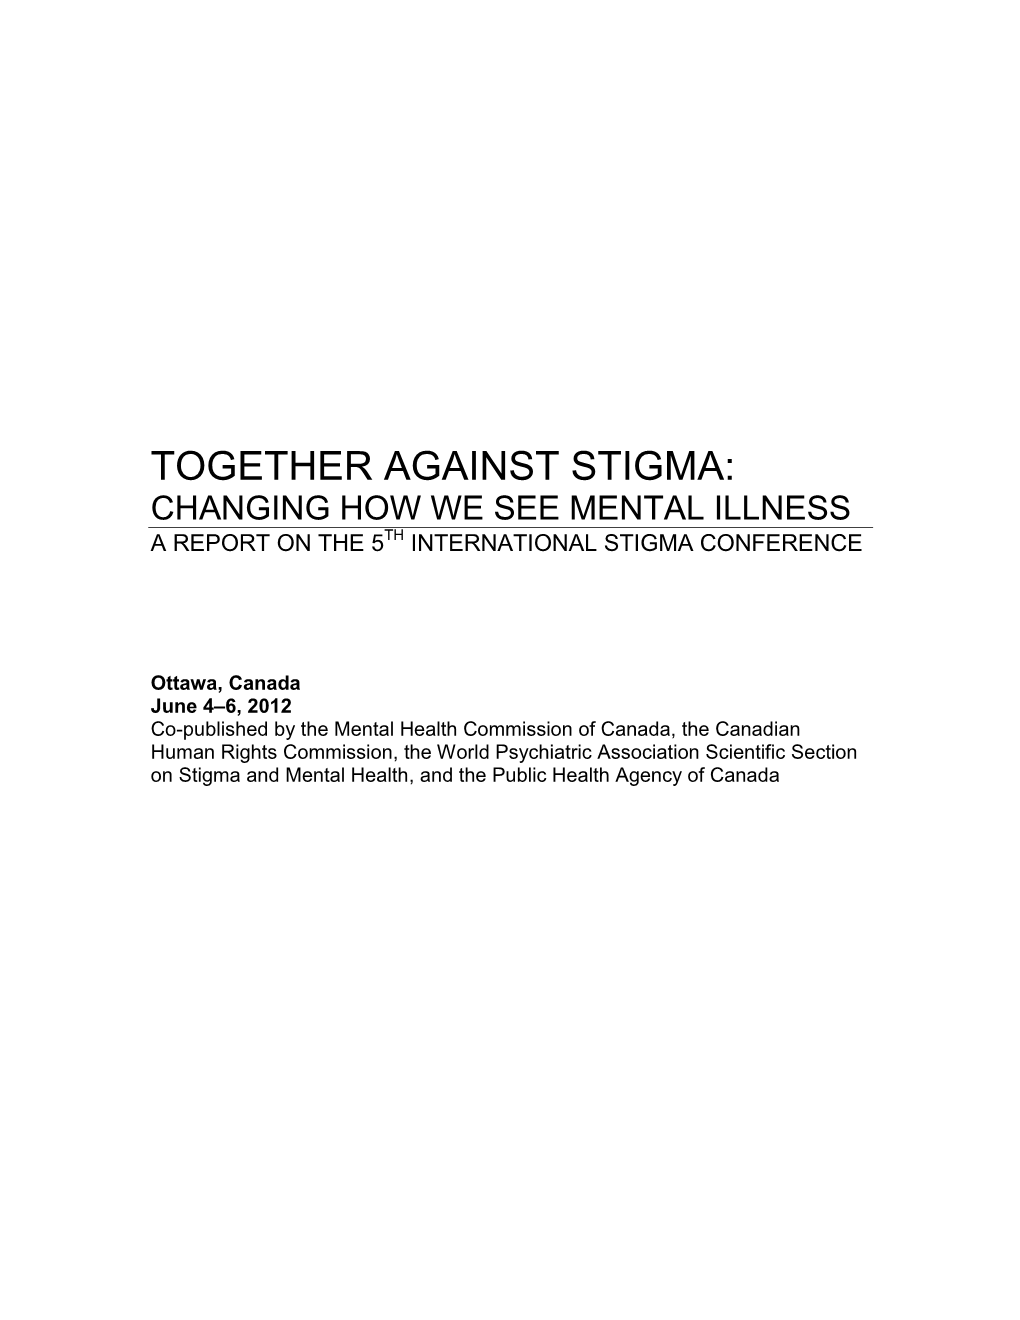 Together Against Stigma: Changing How We See Mental Illness a Report on the 5Th International Stigma Conference